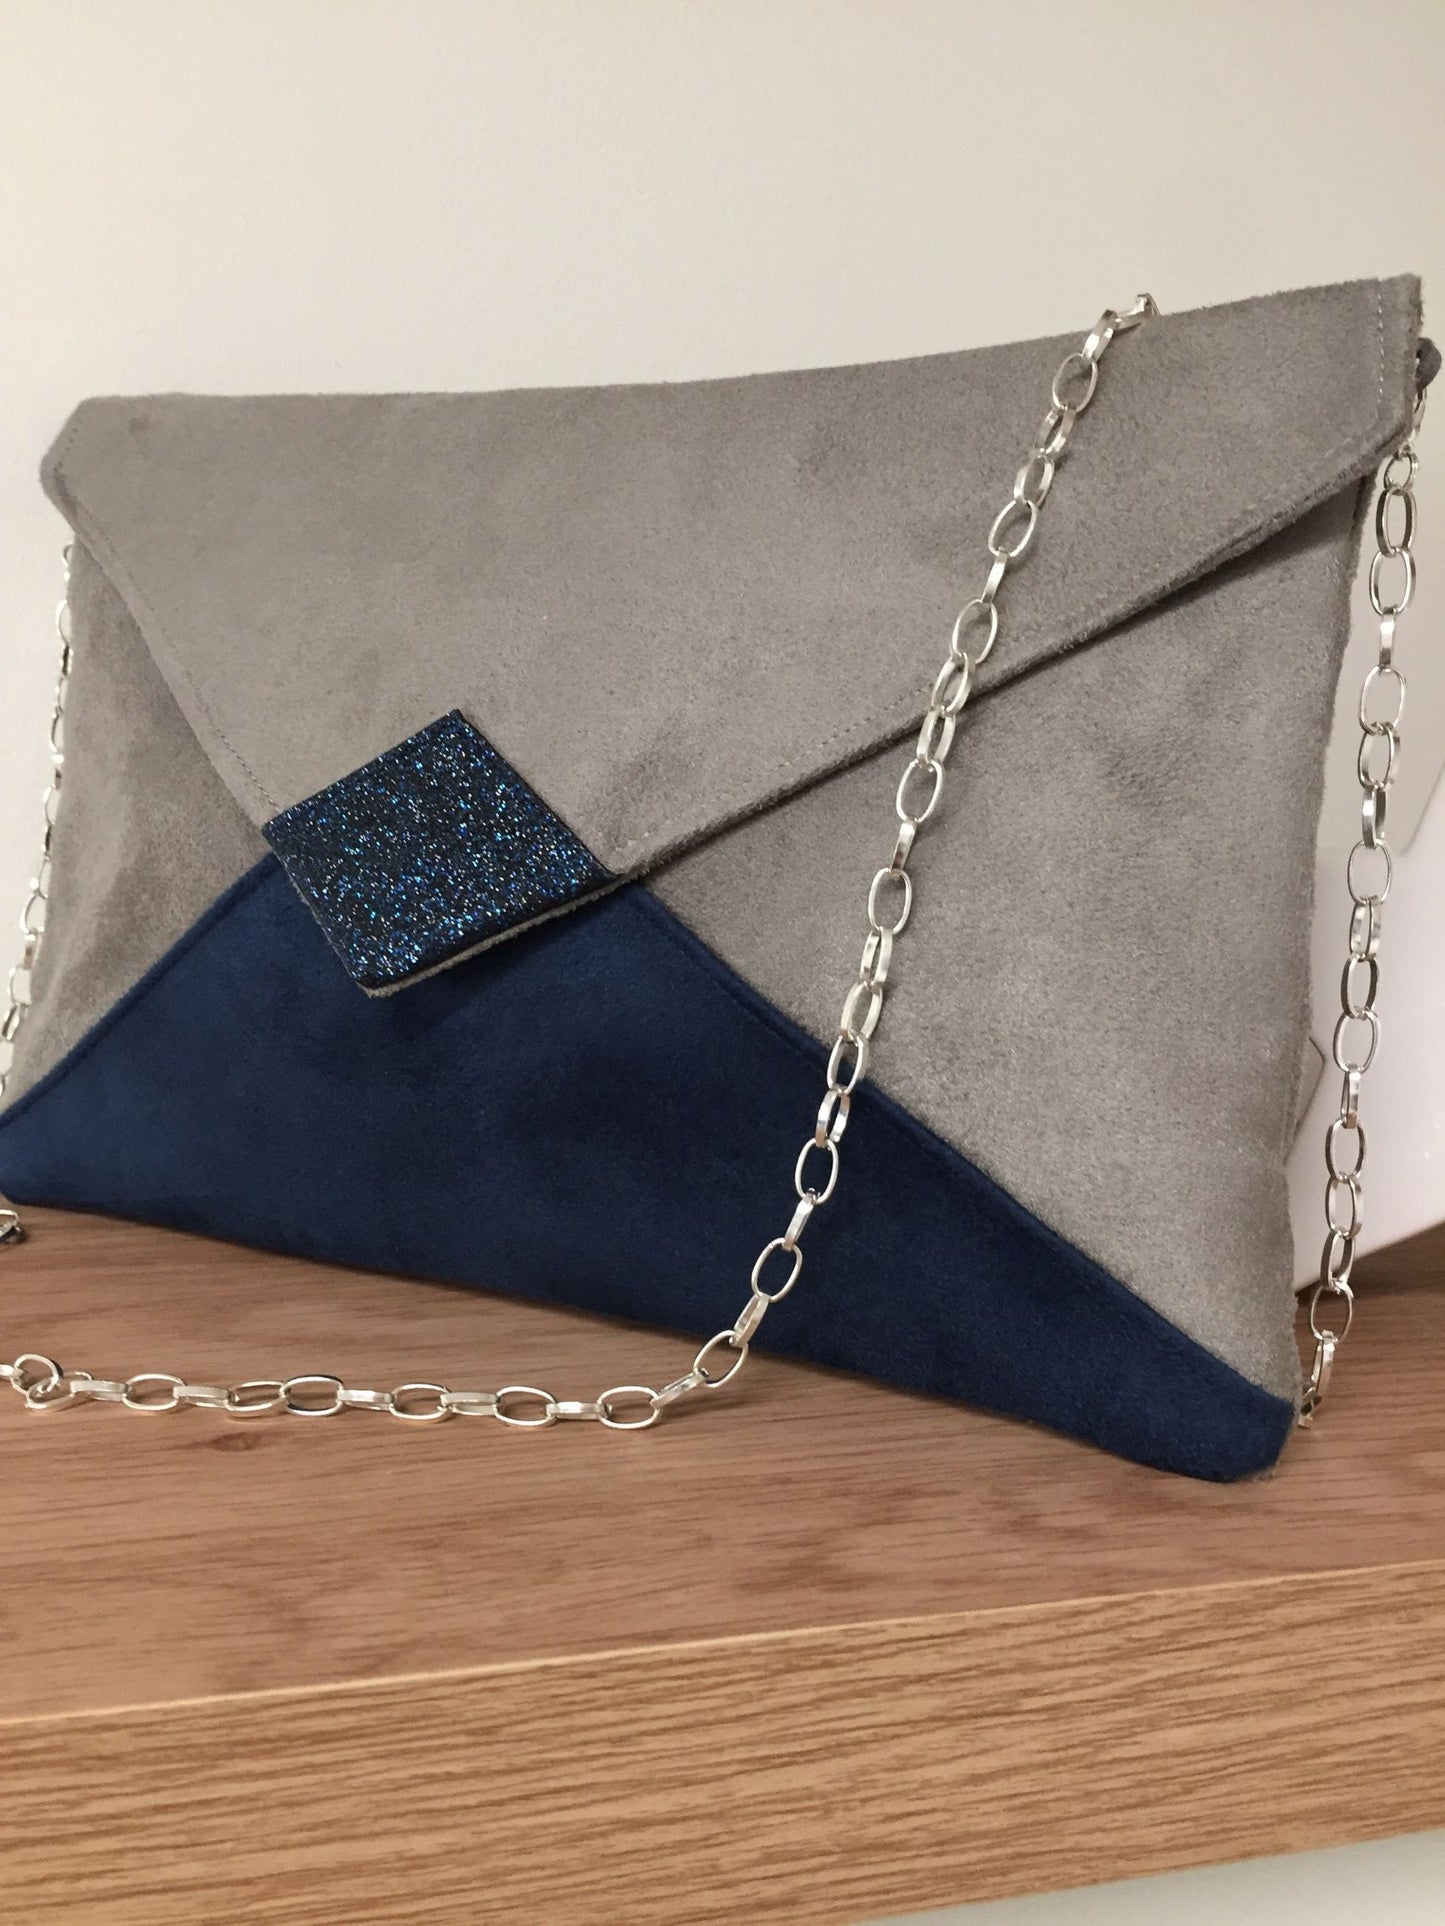 Isa clutch bag in taupe gray and navy blue with sequins